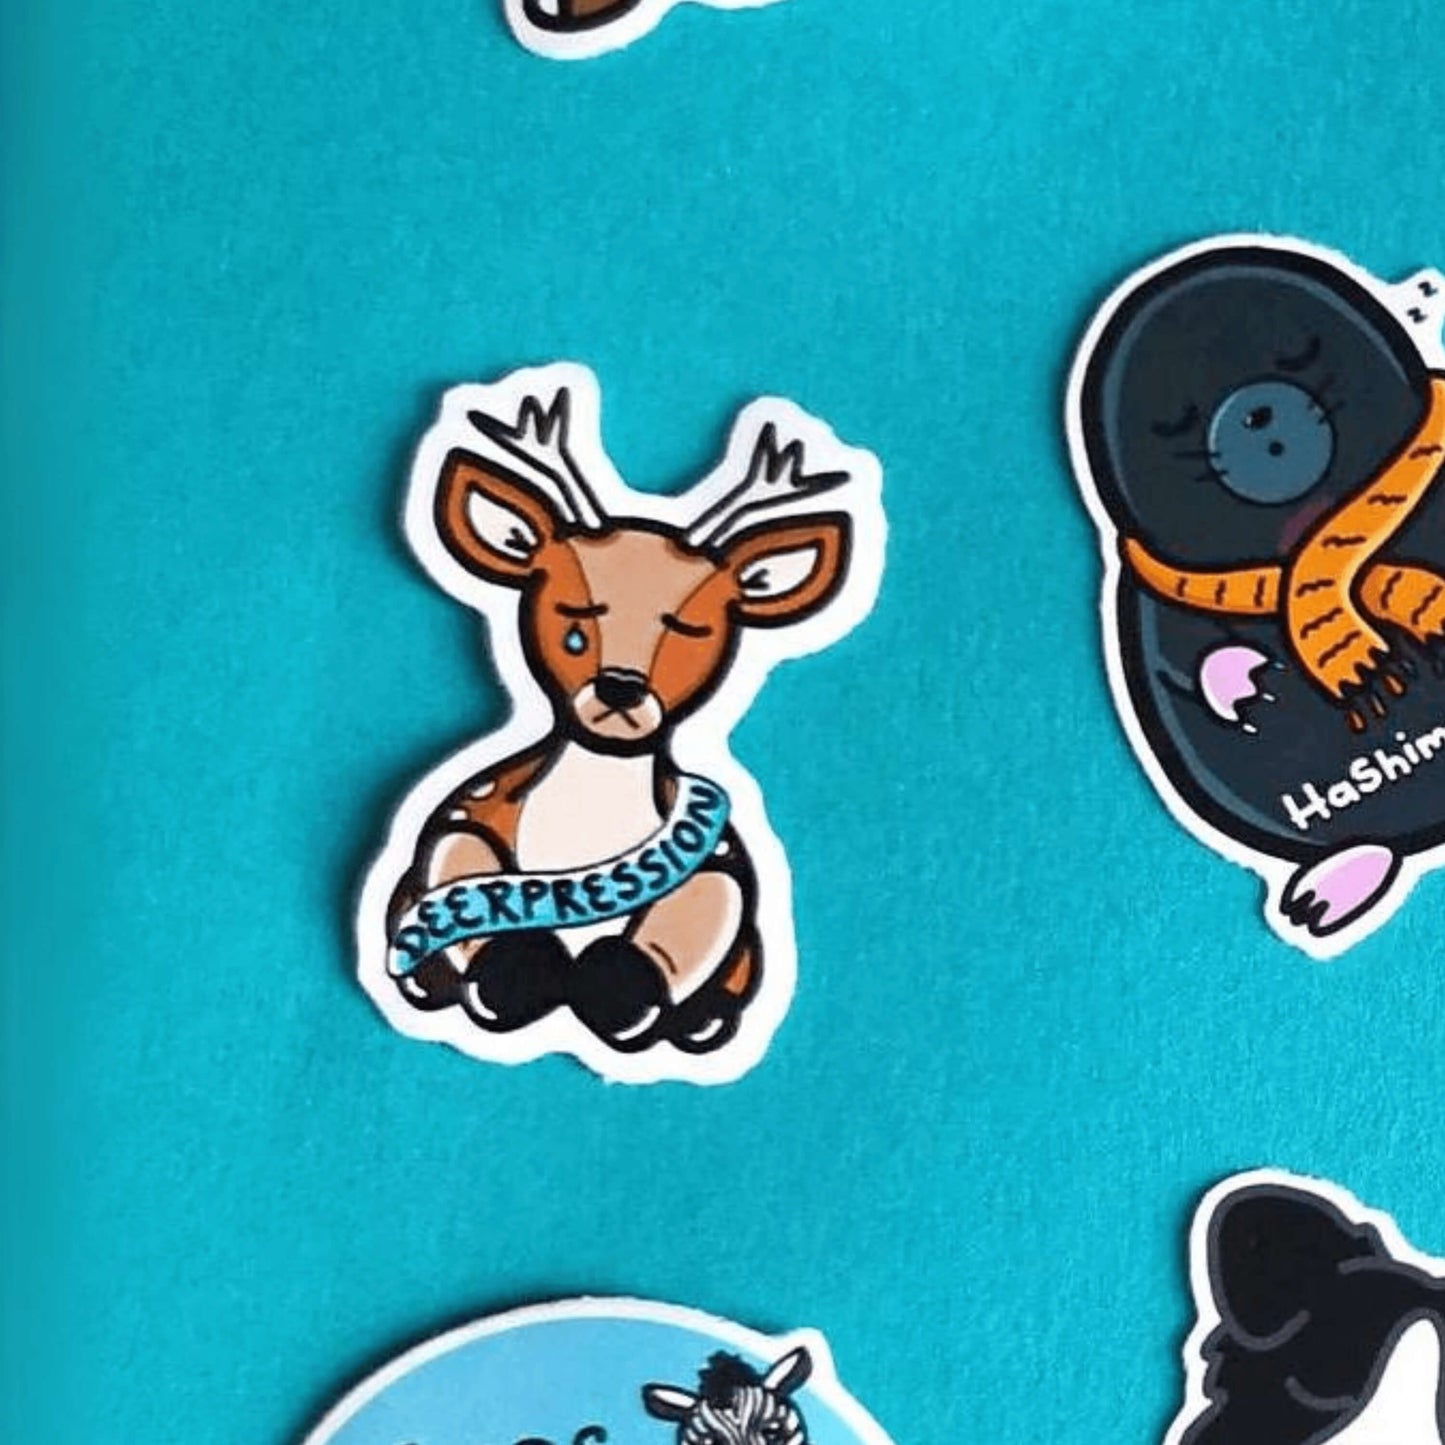 The Deerpression Sticker - Depression on a blue background with other innabox stickers. The deer shaped sticker has its eyes closed with a tear falling down one cheek, across its middle is a blue banner with black text reading 'deerpression'. The design was created to raise awareness for depression.